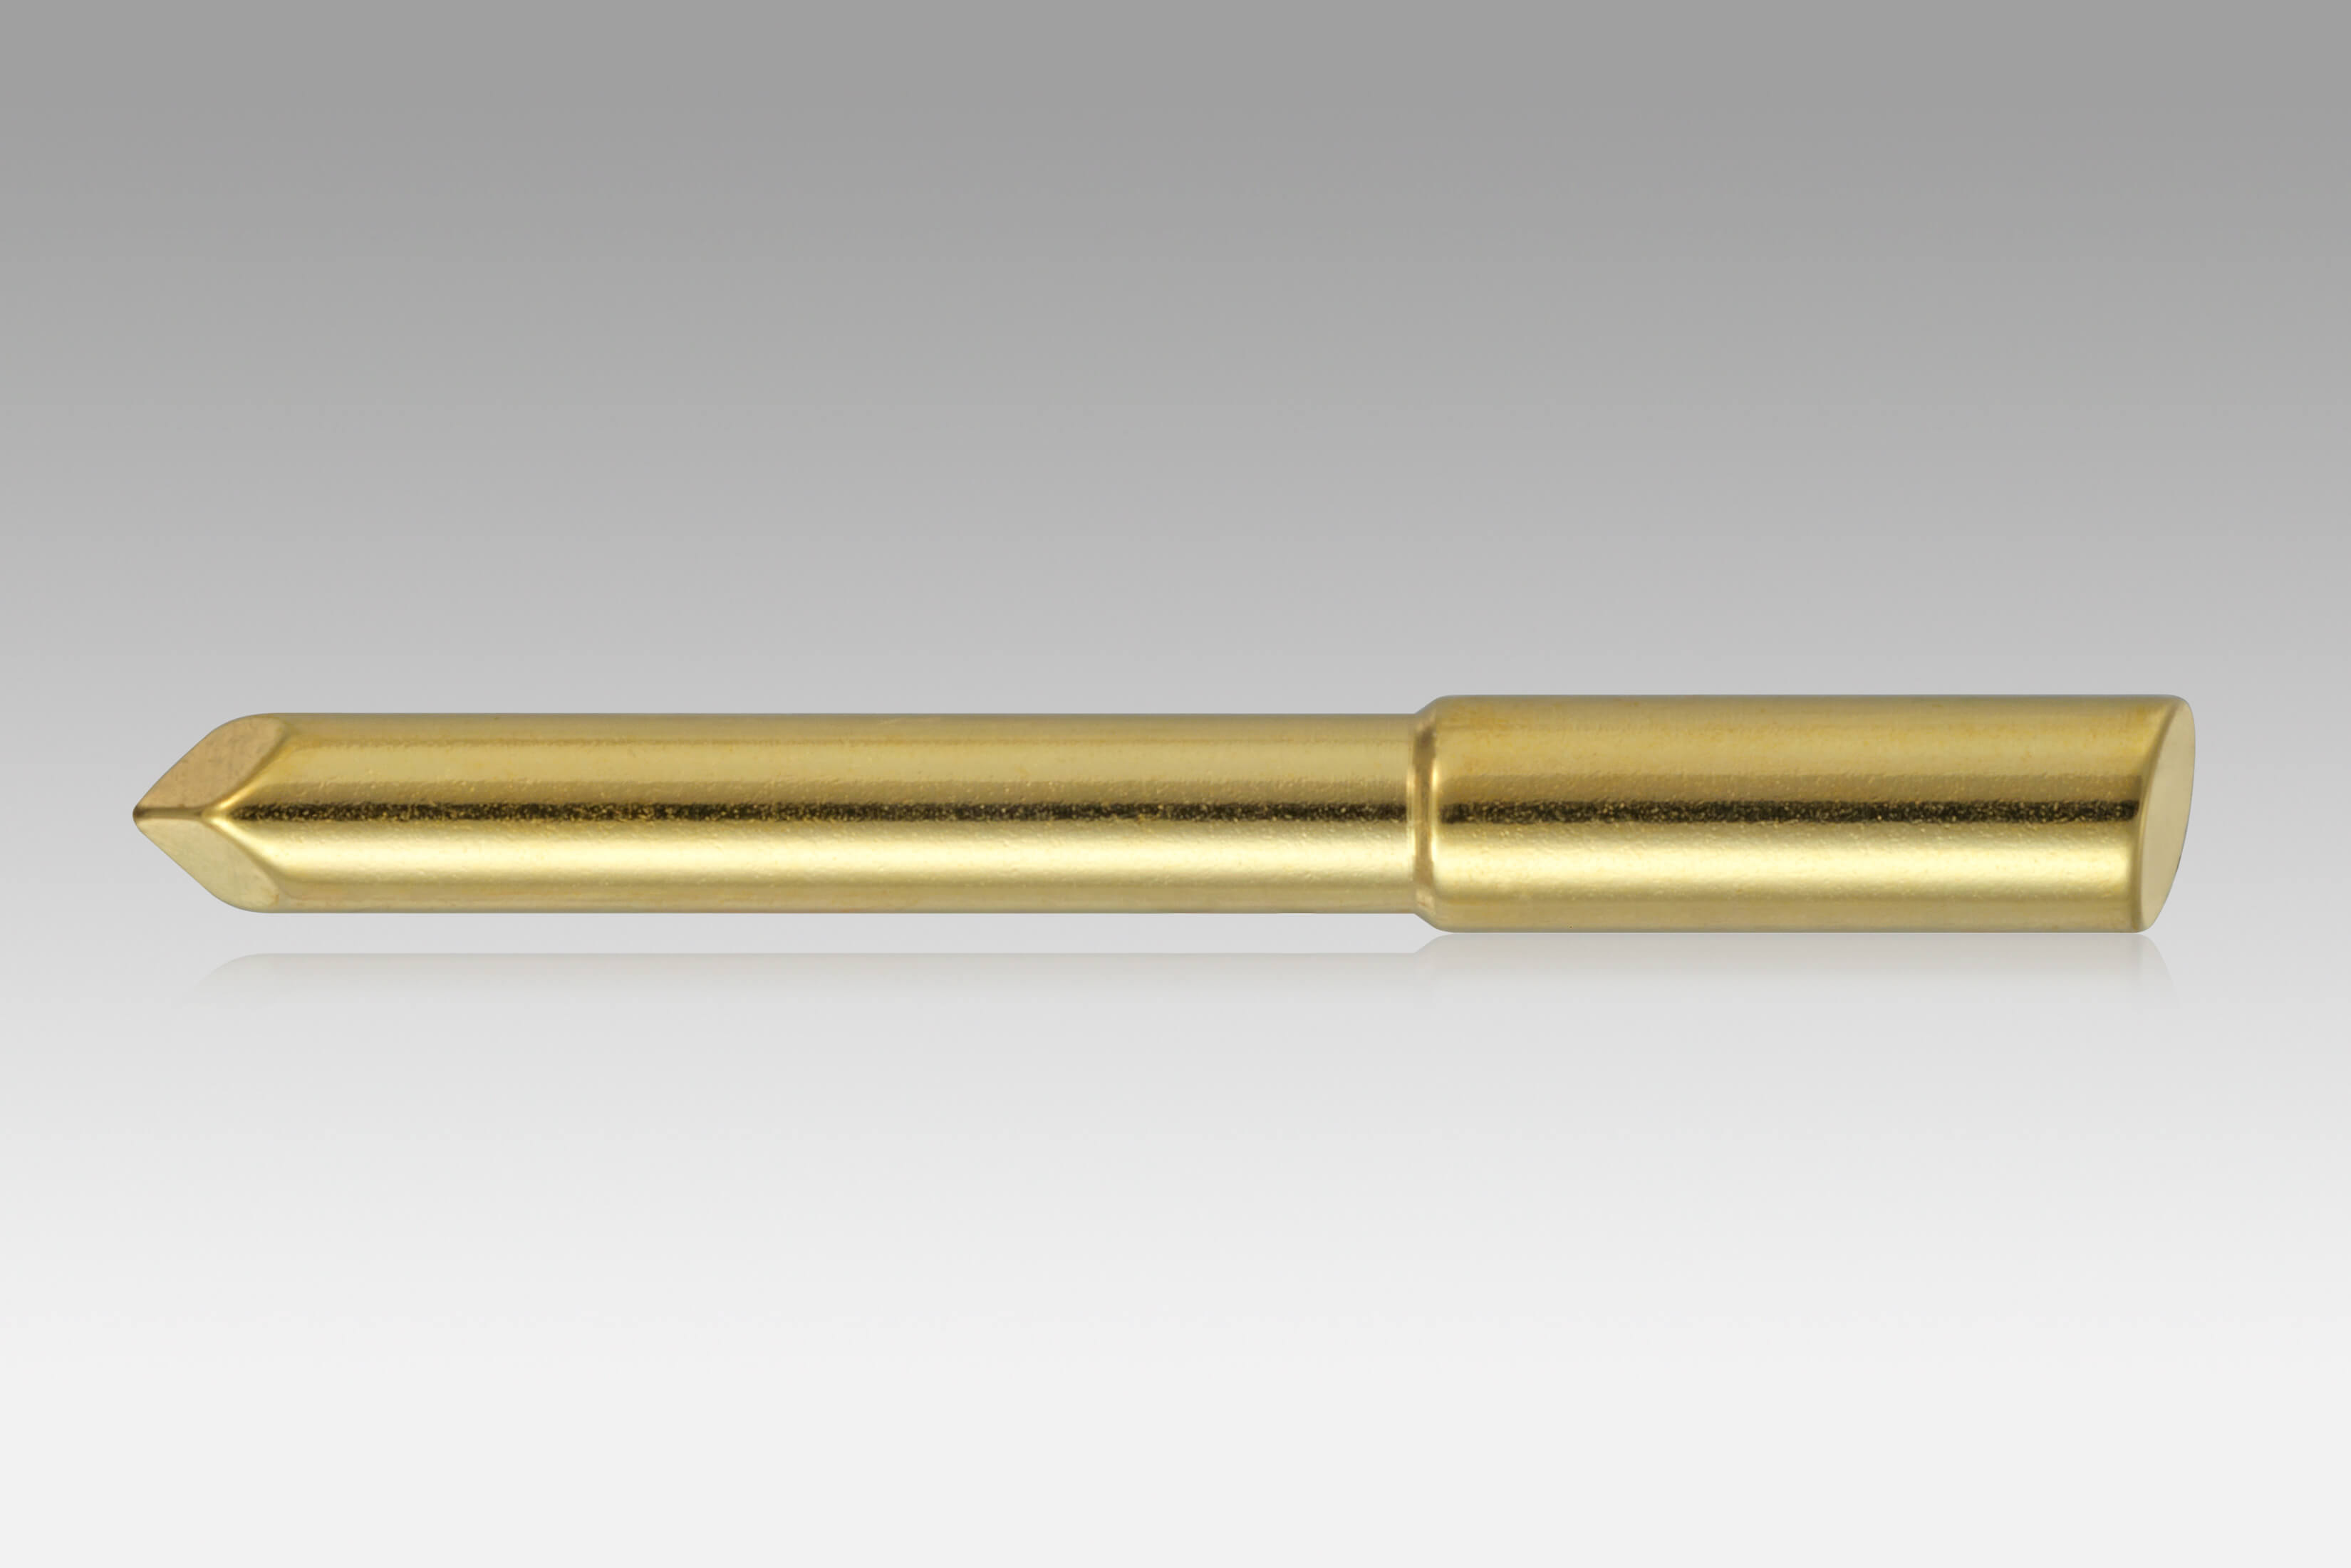 : Plunger (test probe) - Swiss supplier and manufacturer of micro-components for electronics